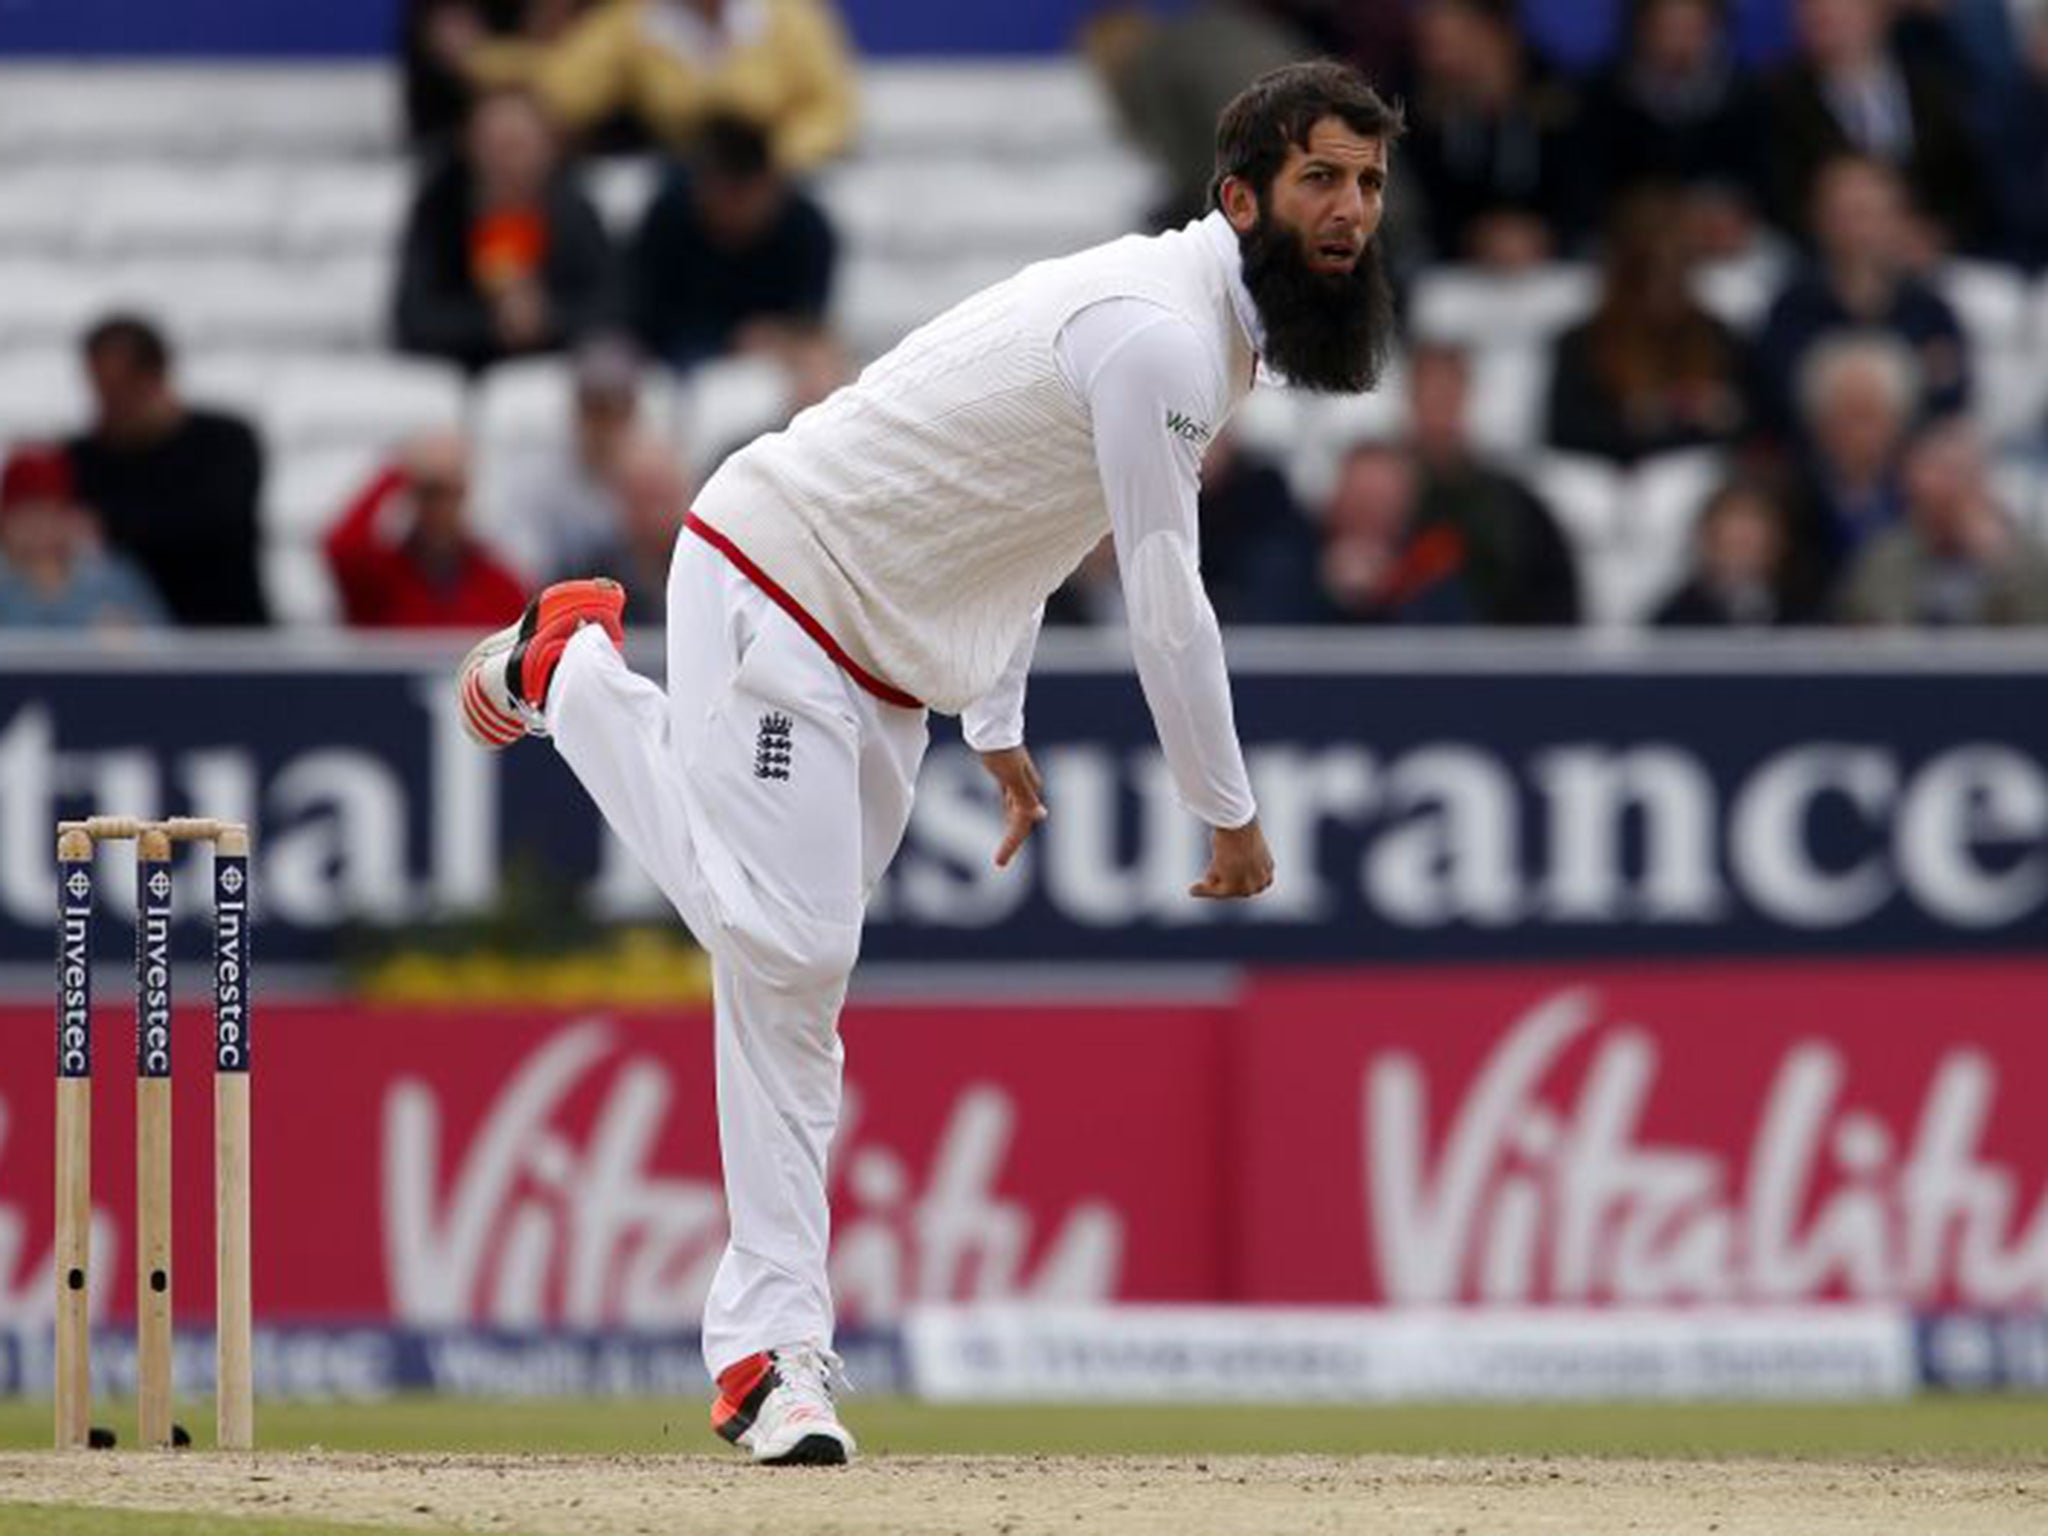 Moeen Ali has taken advice from Joe Root and Jos Buttler about how to bat with the England tailenders